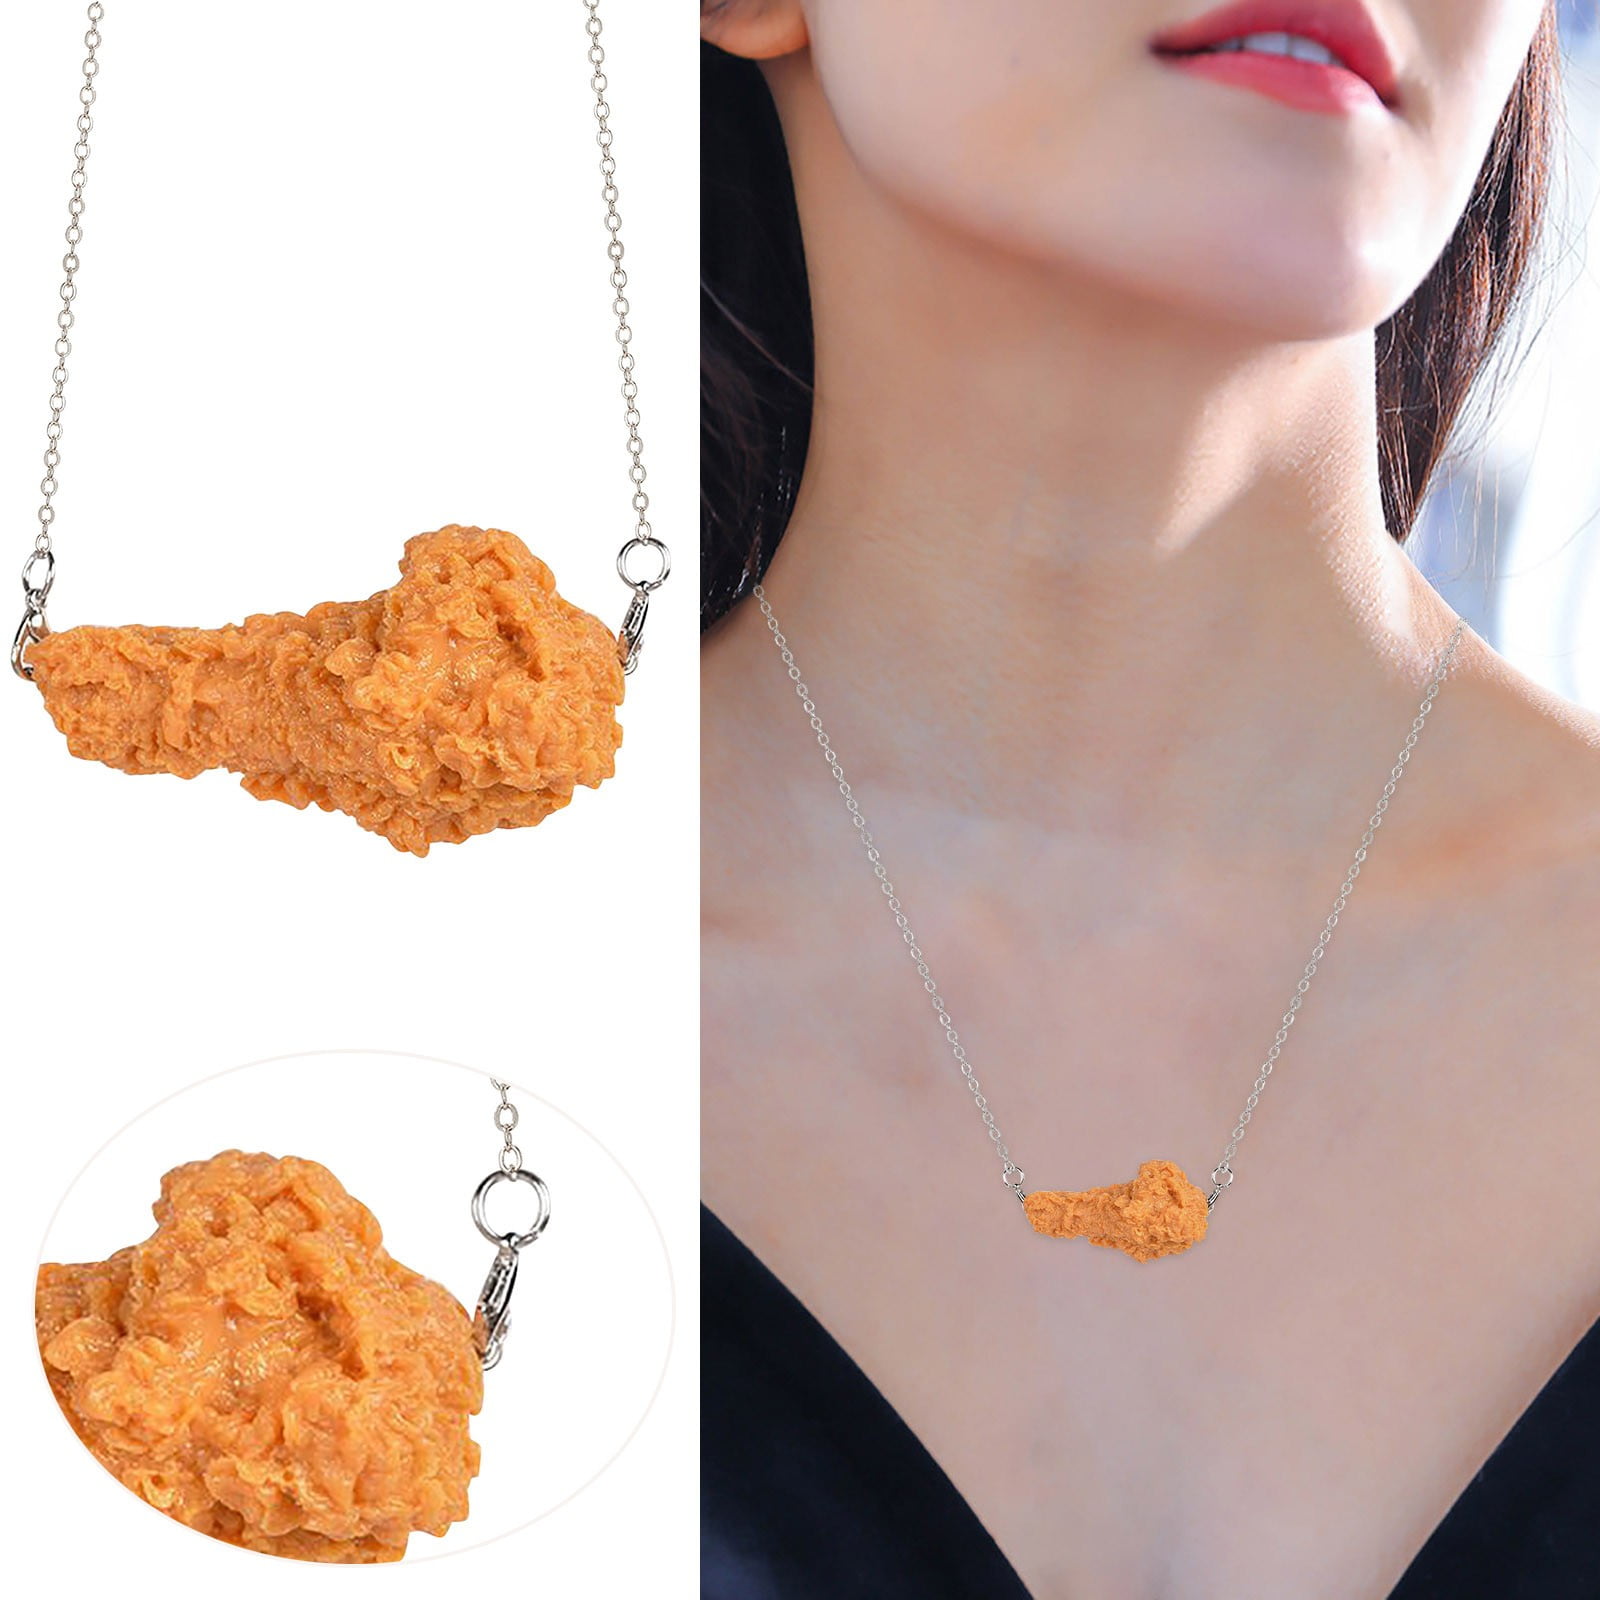 Buy Thug Nug Necklace gold Speckled Sunglasses, Real Chicken Nugget Online  in India - Etsy